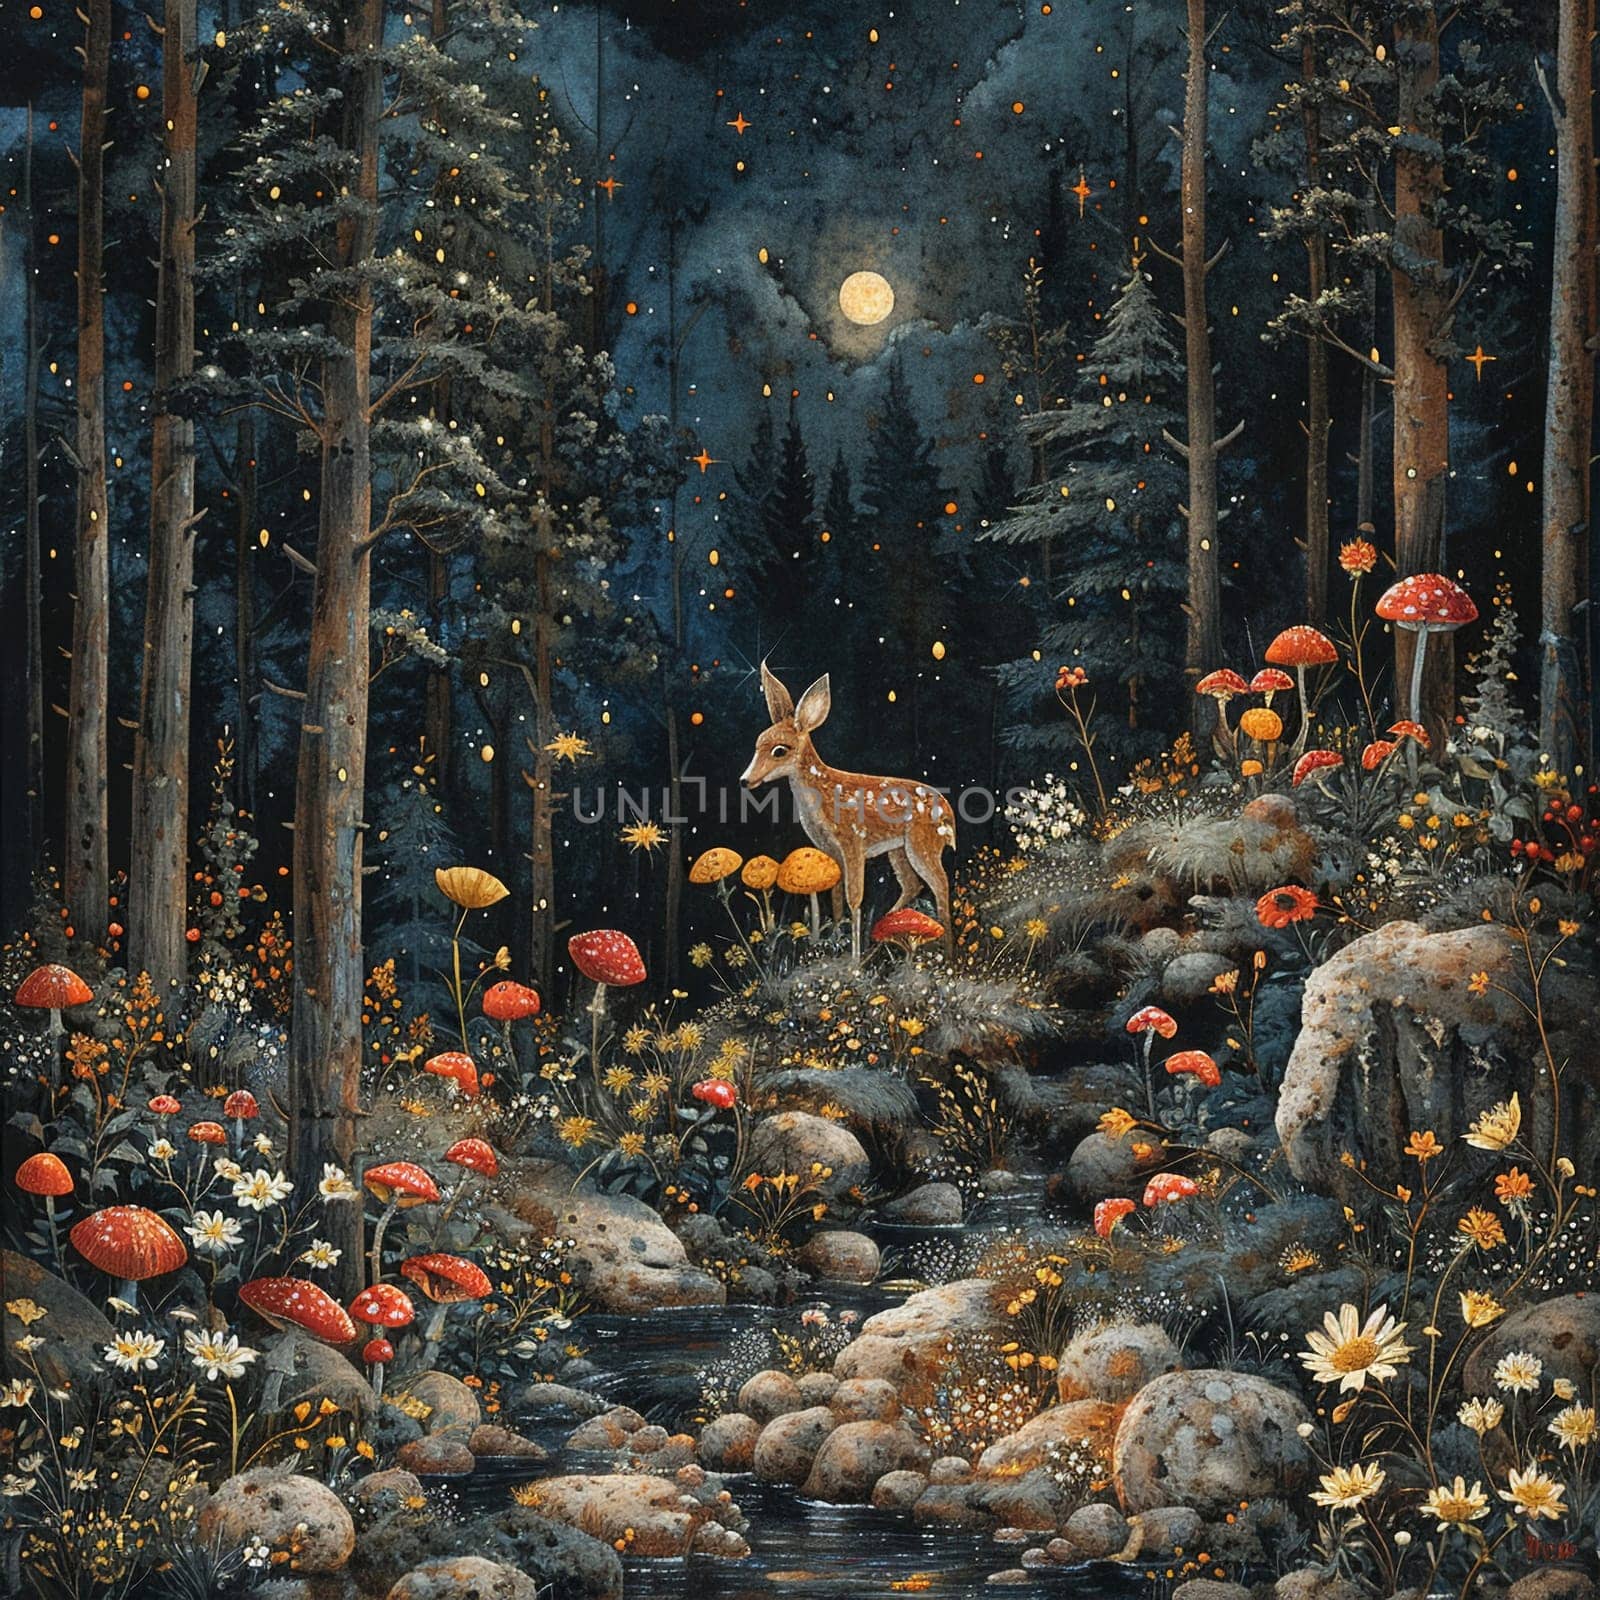 Enchanted forest scene with fairies and woodland creatures, painted in a detailed, classic illustration style.